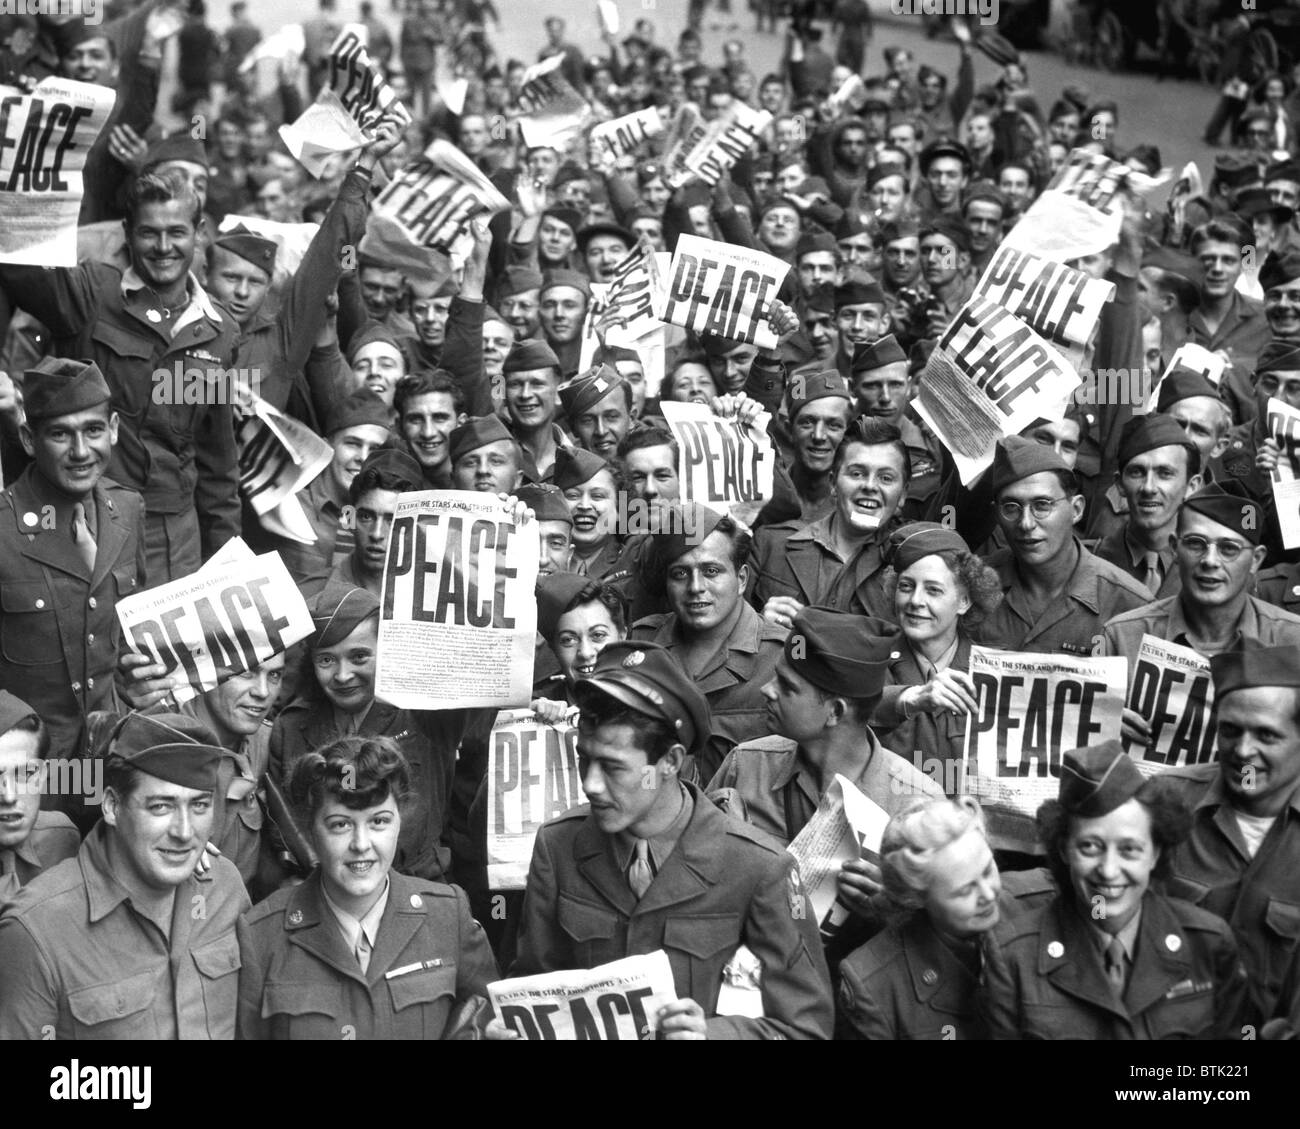 EV1946 - US Army men and women in Japan following the surrender of the Japanese army on September 2, 1945 Stock Photo